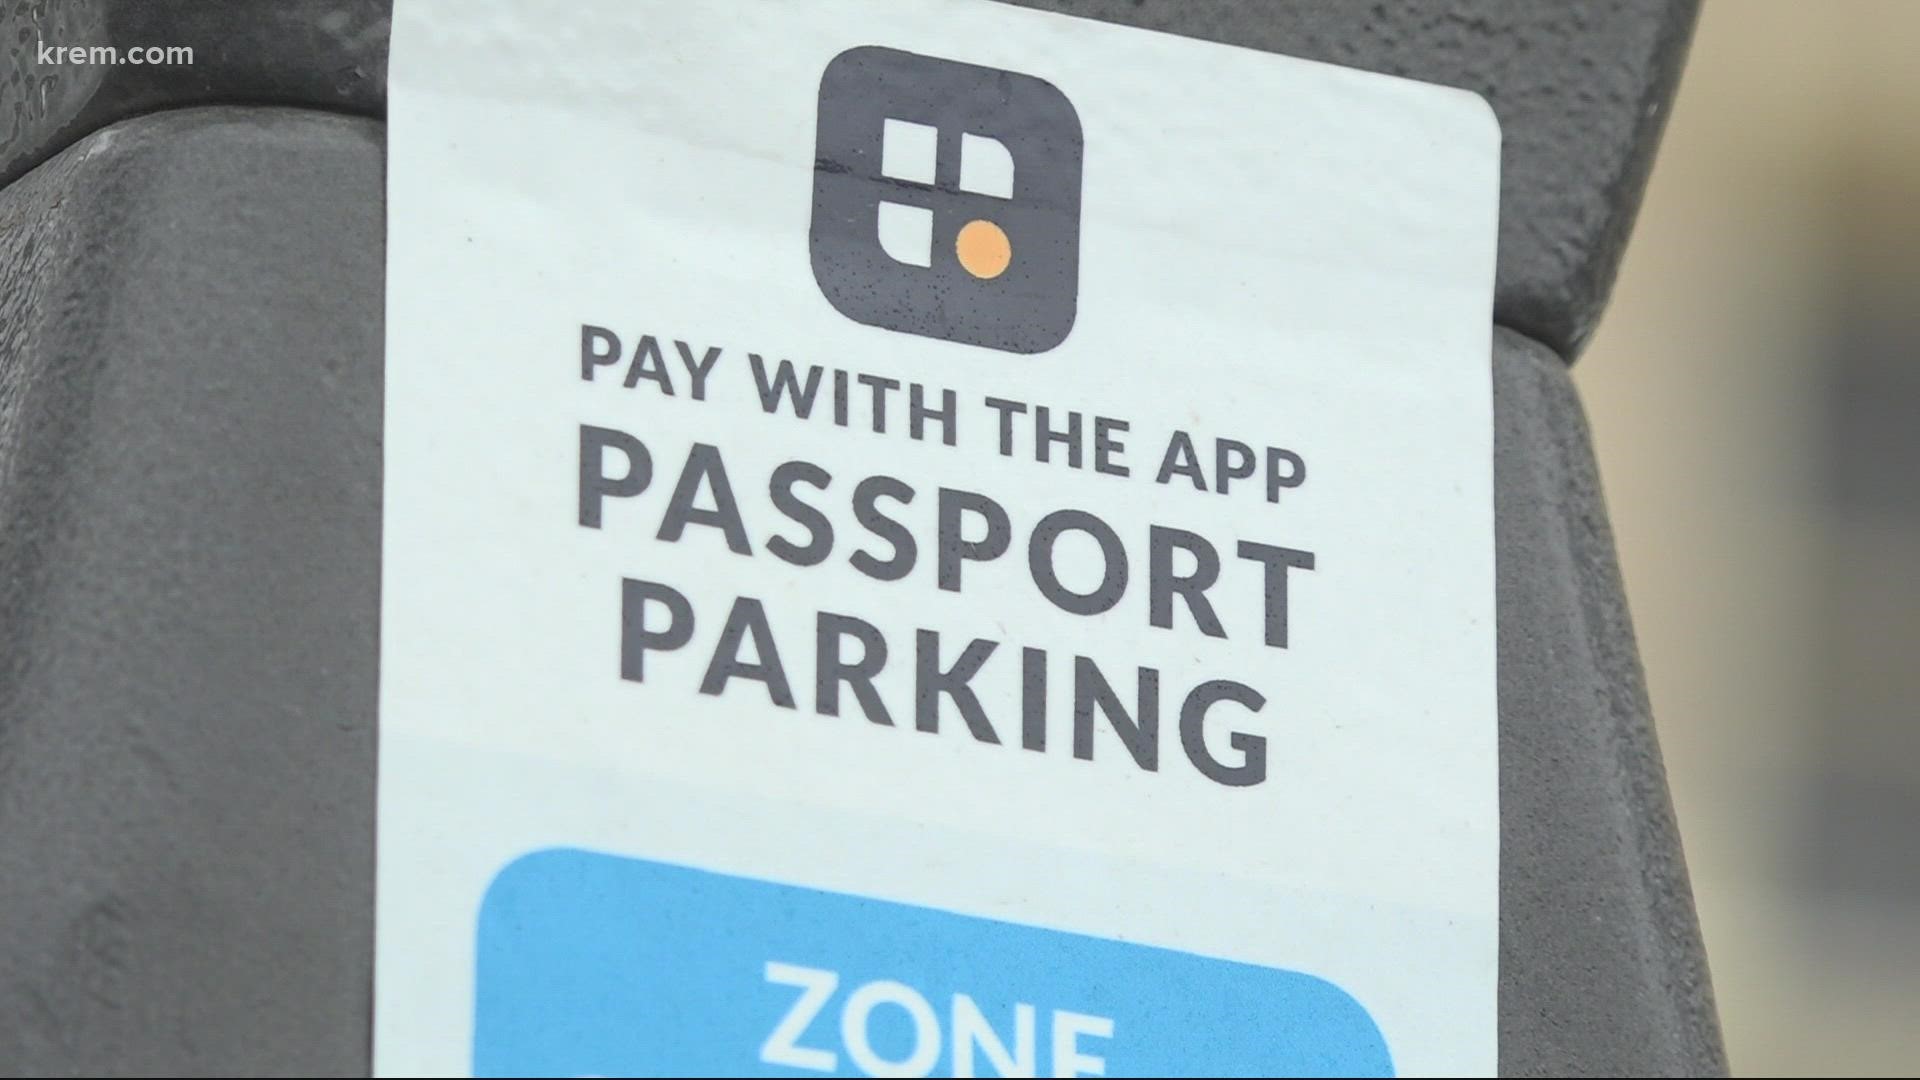 Paying for parking in Spokane is proving to be more difficult than necessary. It turns out people are having issues paying through the Passport Parking app.